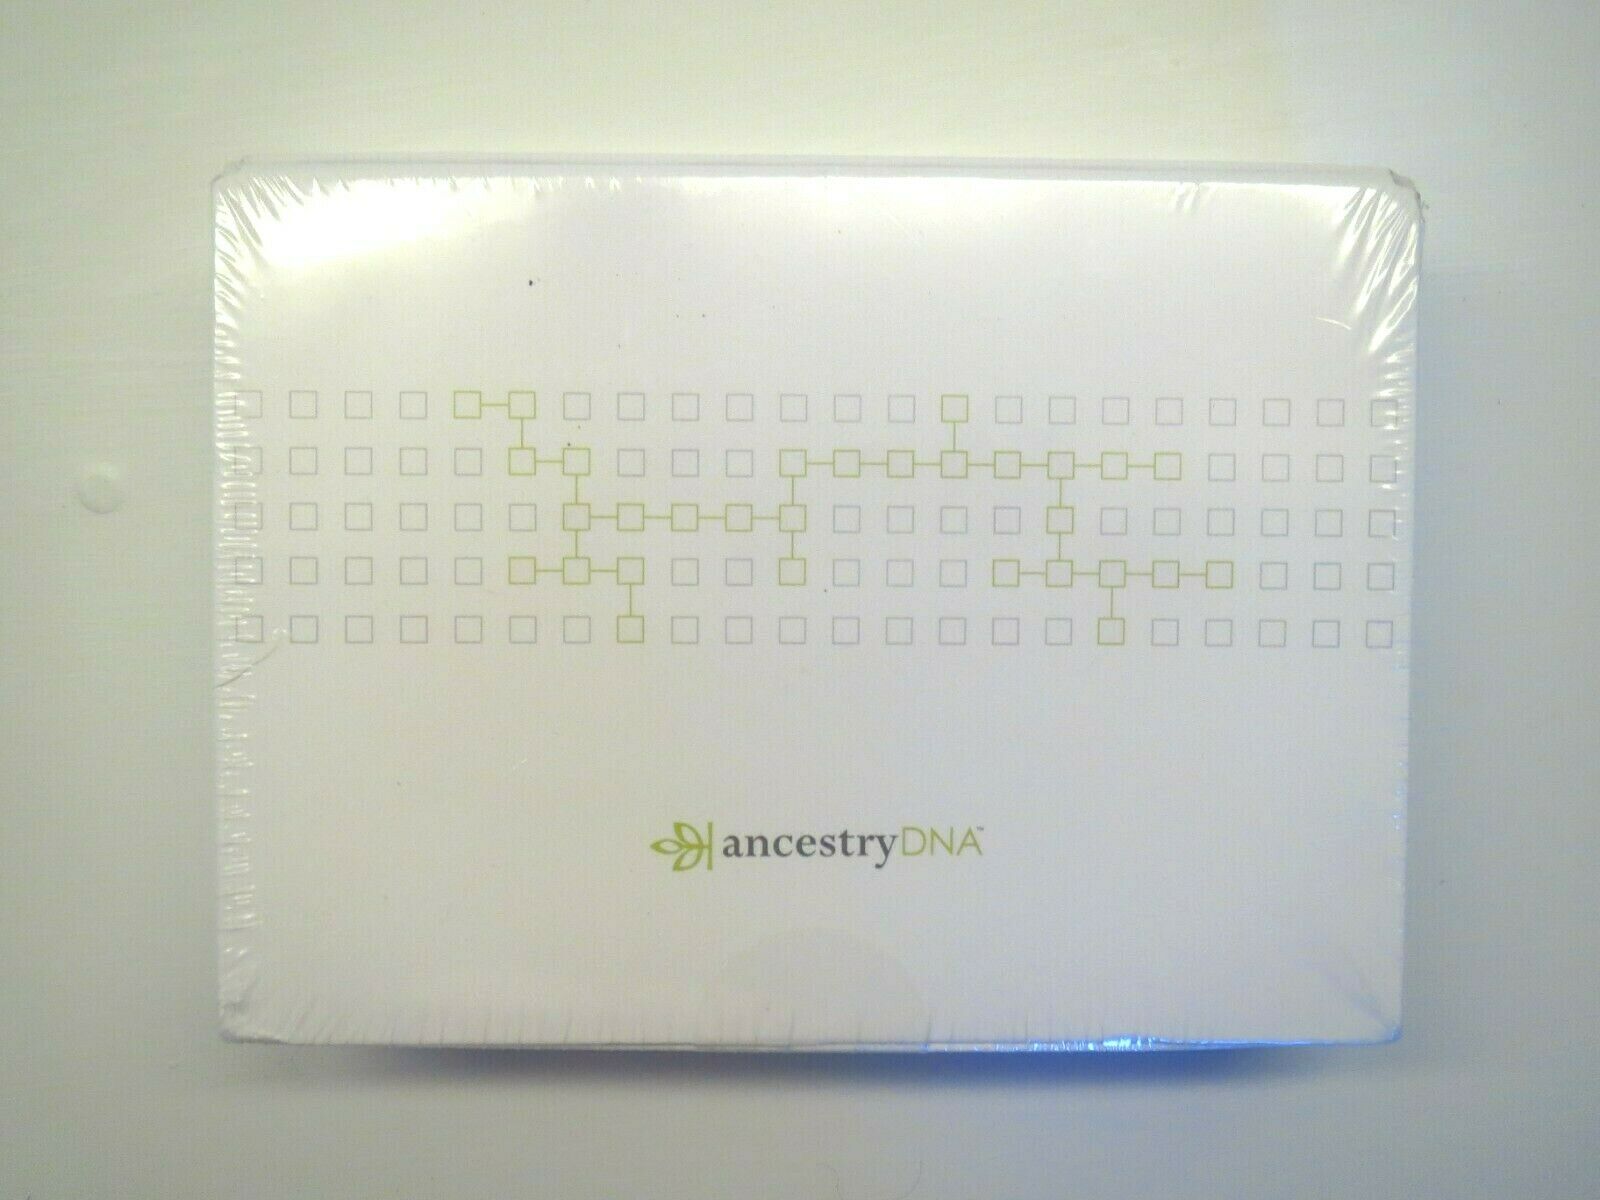 Ancestry DNA Test Kit Brand New Factory Sealed Shrink Wrapped